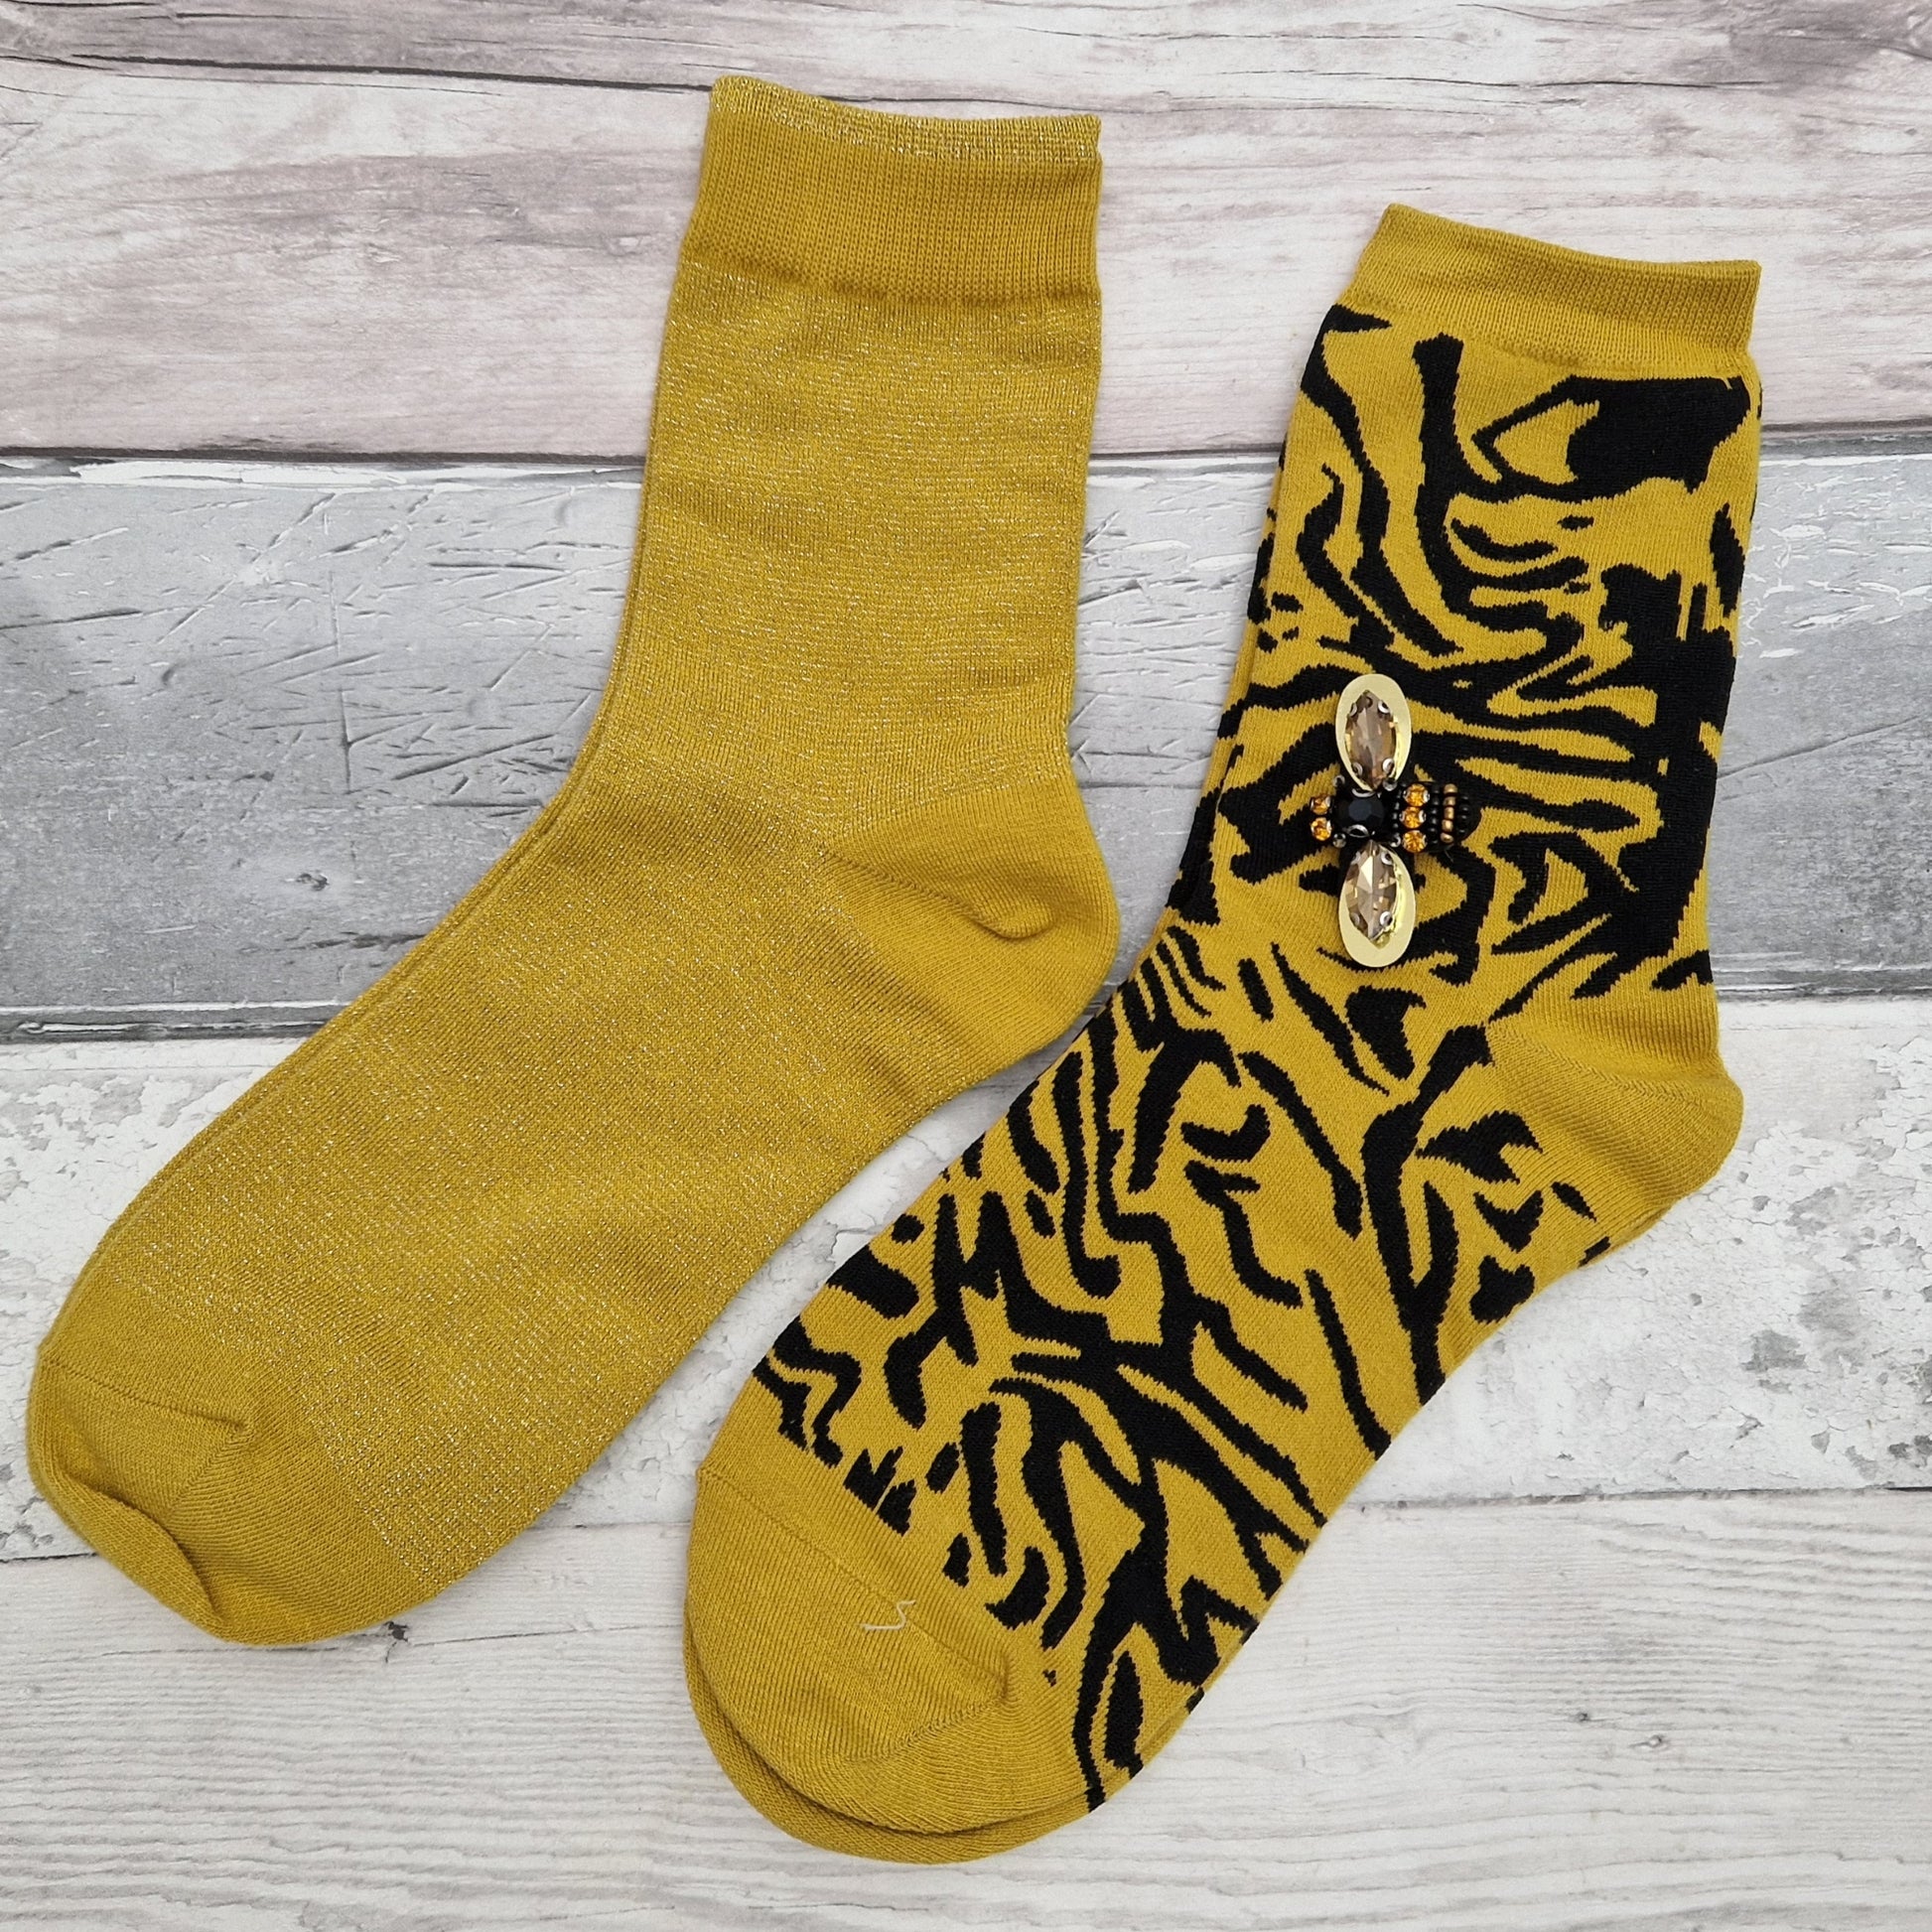 2 Pairs of yellow coloured socks presented in a gift box with a sparkling Bee Brooch made of recycled glass.